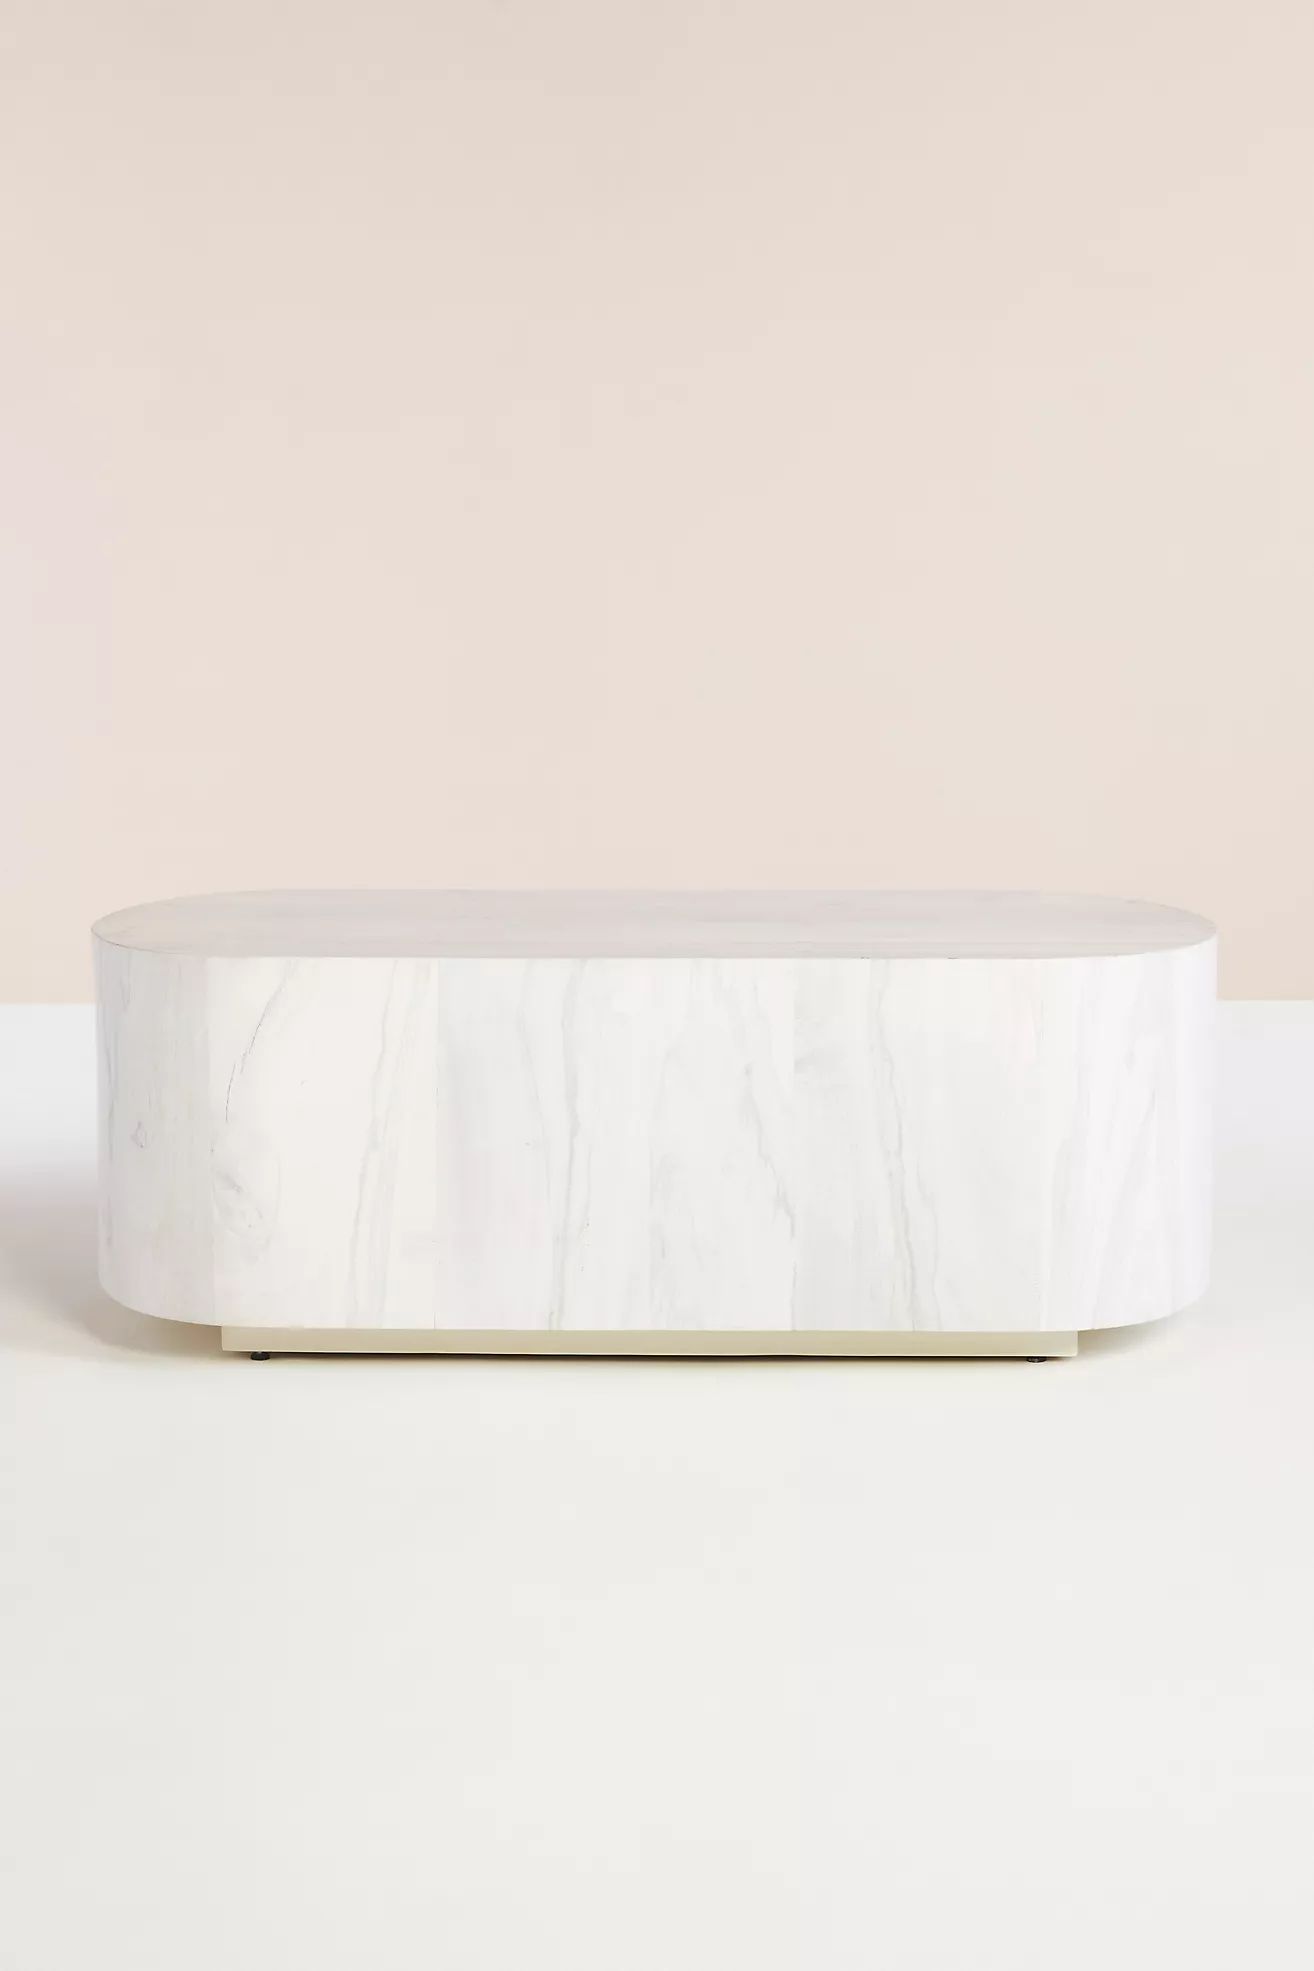 Swirled Drum Reclaimed Oval Coffee Table | Anthropologie (US)